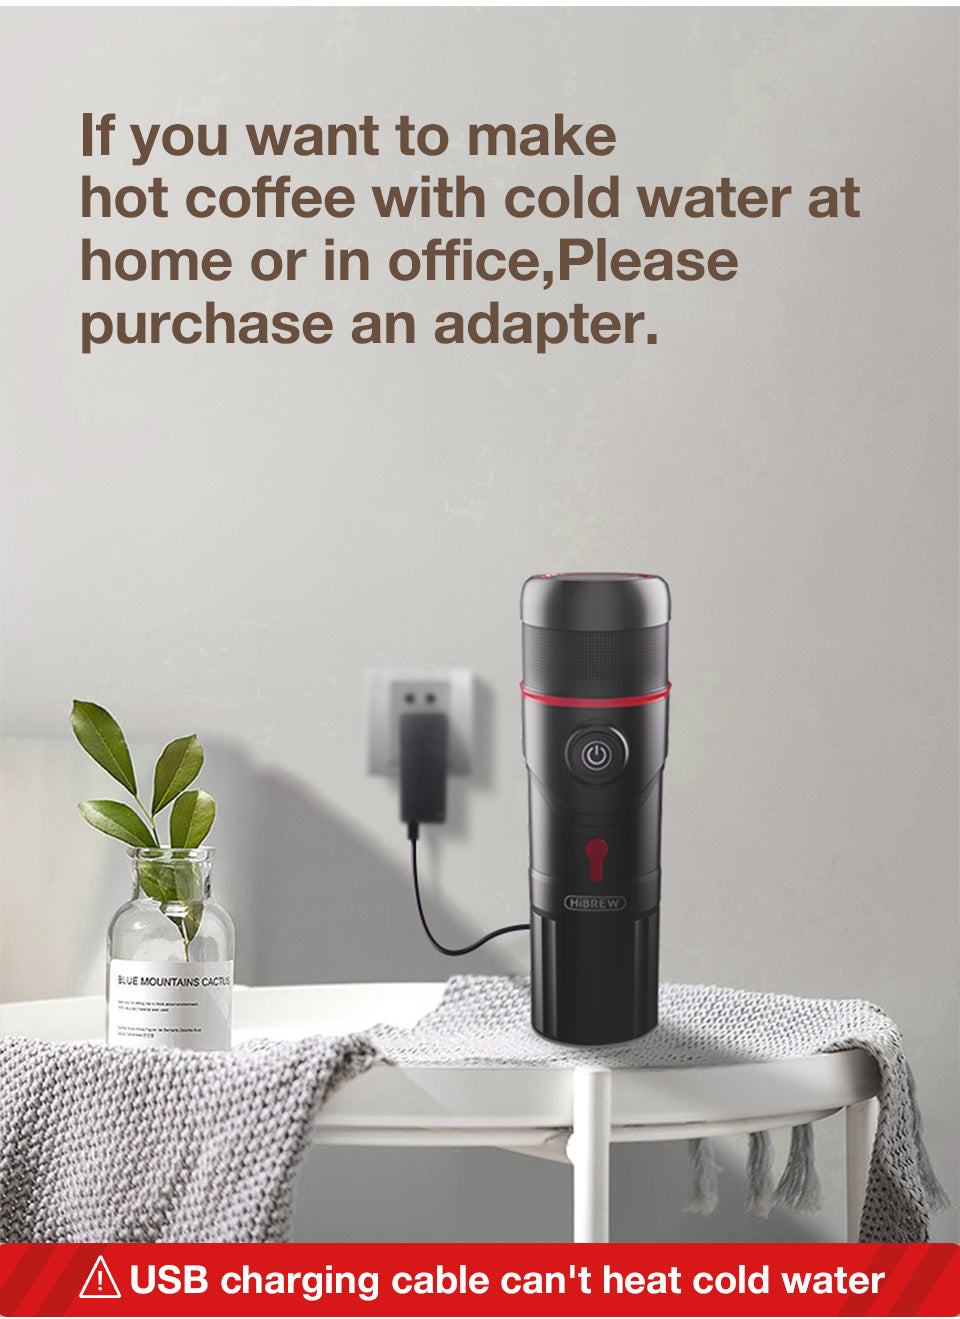 HiBREW 3 in 1 multi function portable coffee machine